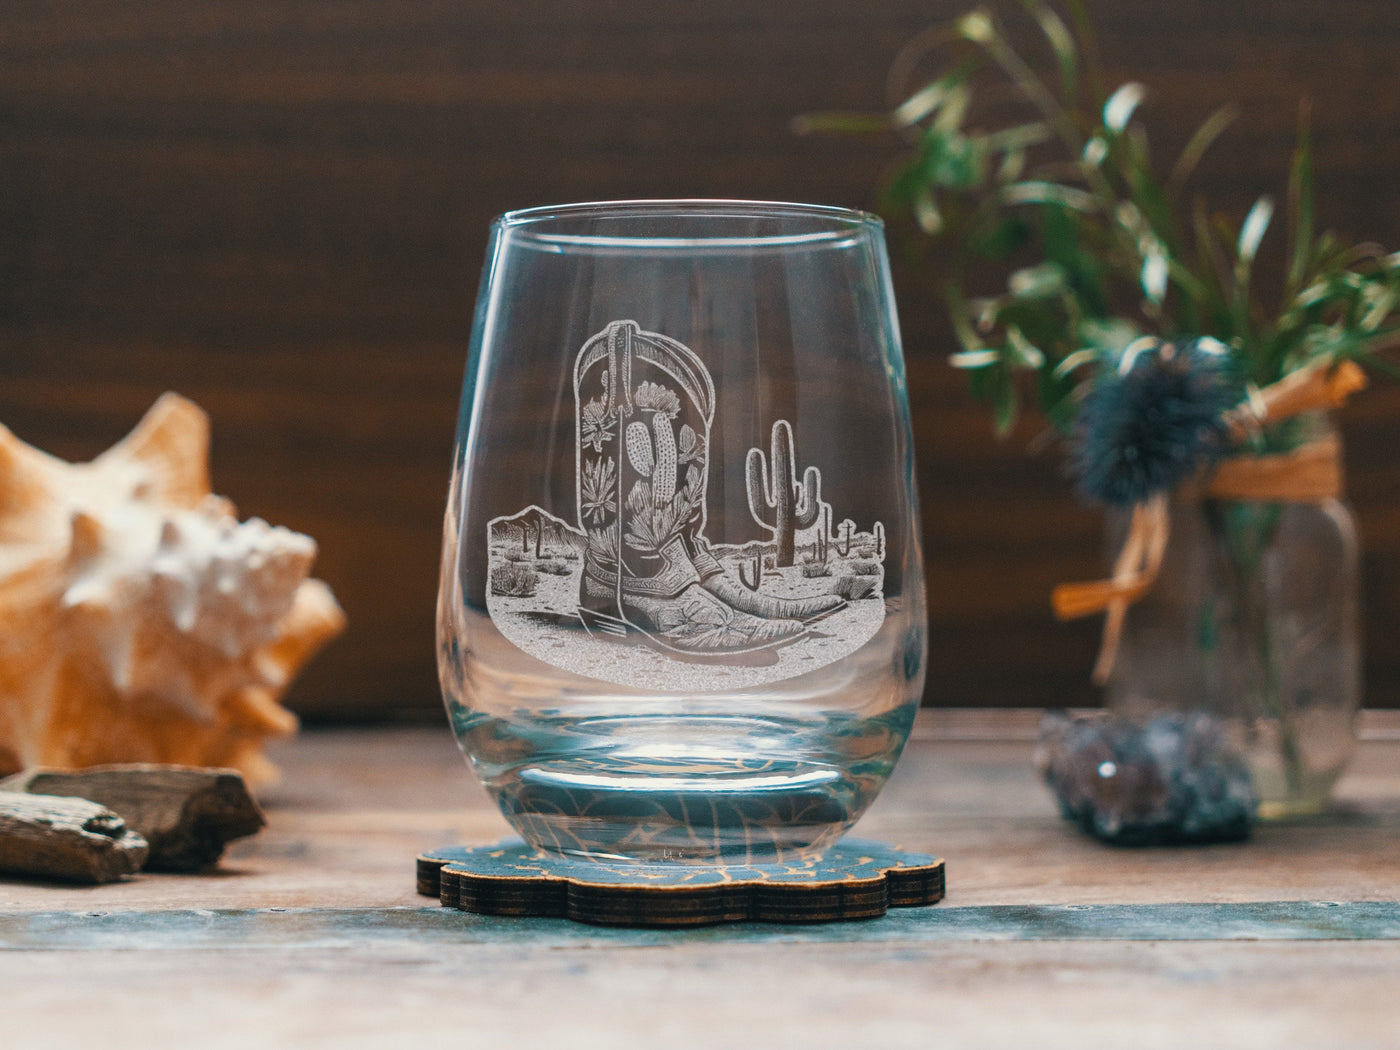 Western Cowboy Boot Scene Glasses | Personalized etched glassware for beer, whiskey, wine & cocktails. Desert Scene, Southwestern Decor.